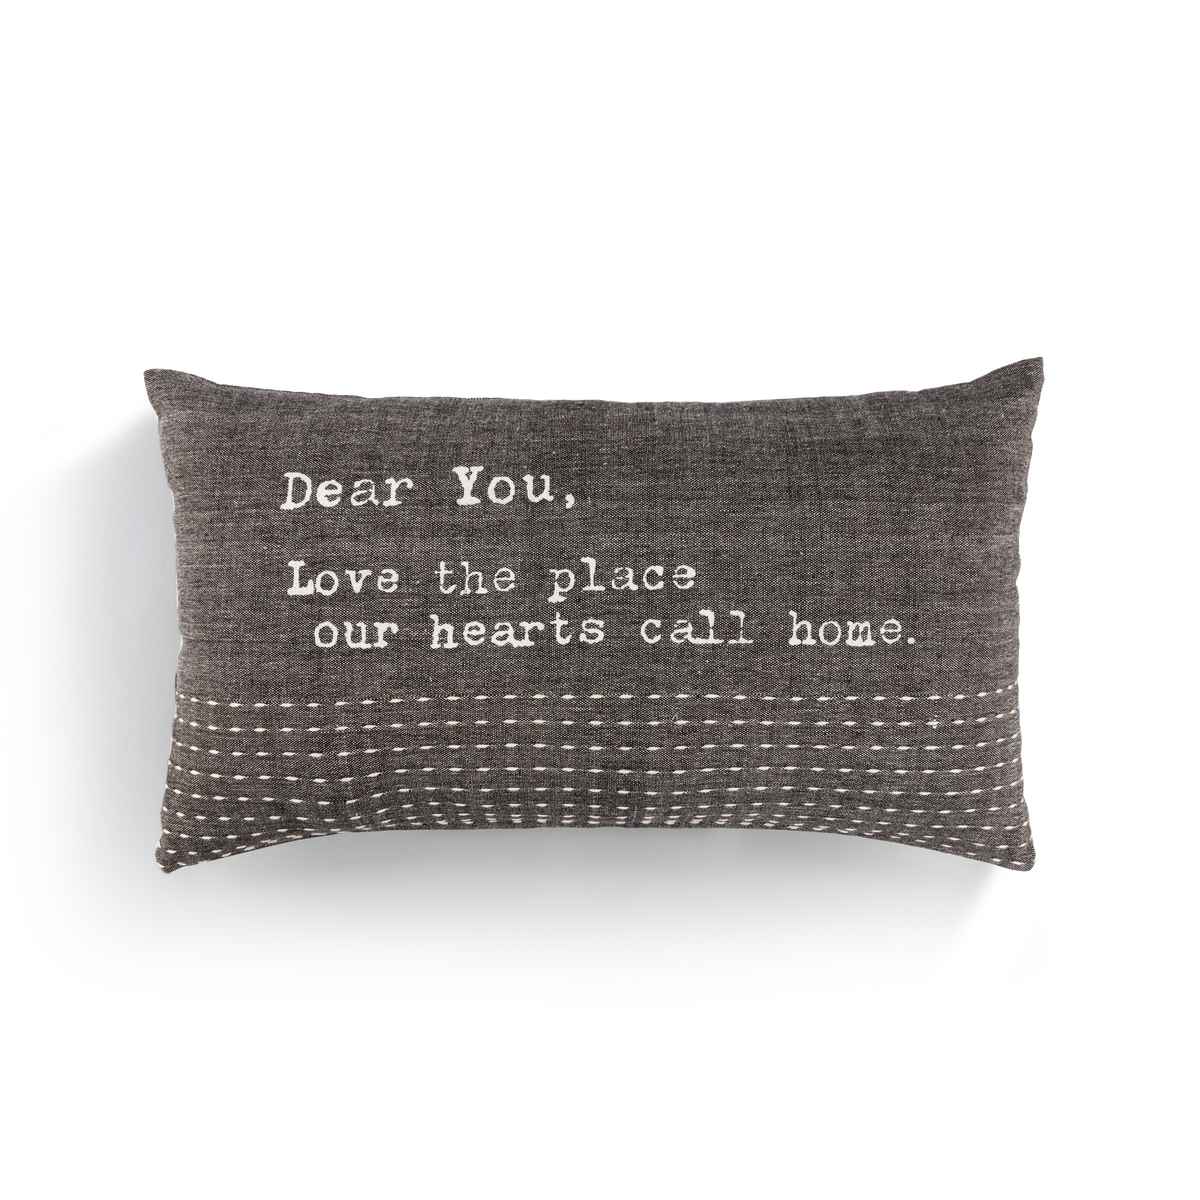 Dear You Pillow - Our Hearts